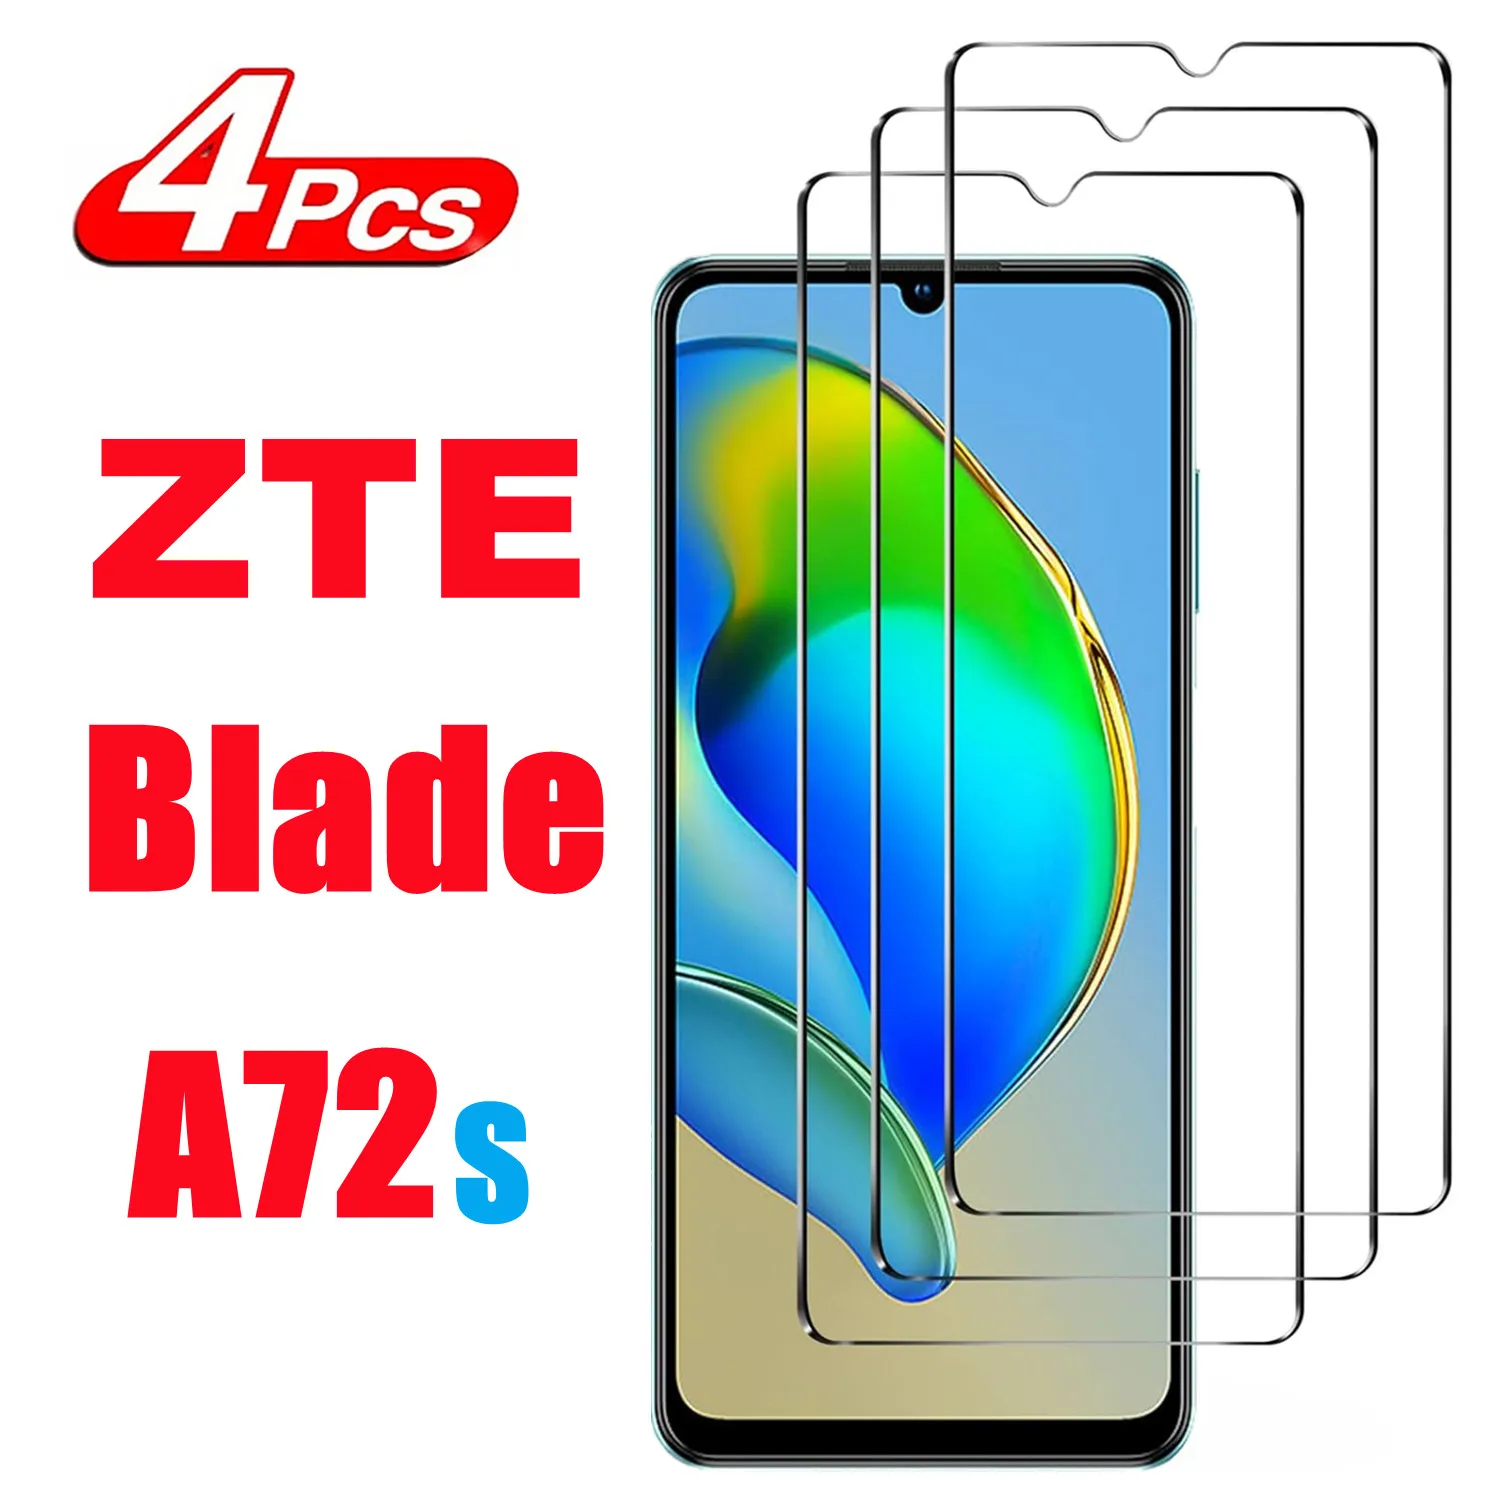 2/4 Pcs For ZTE Blade A72s 9H Tempered Glass For ZTE Blade A72s Screen Protector Glass Film for zte a7s 2020 glass ultra thin 2 5d tempered glass for zte blade a7s 2019 toughened screen protector film protective glass